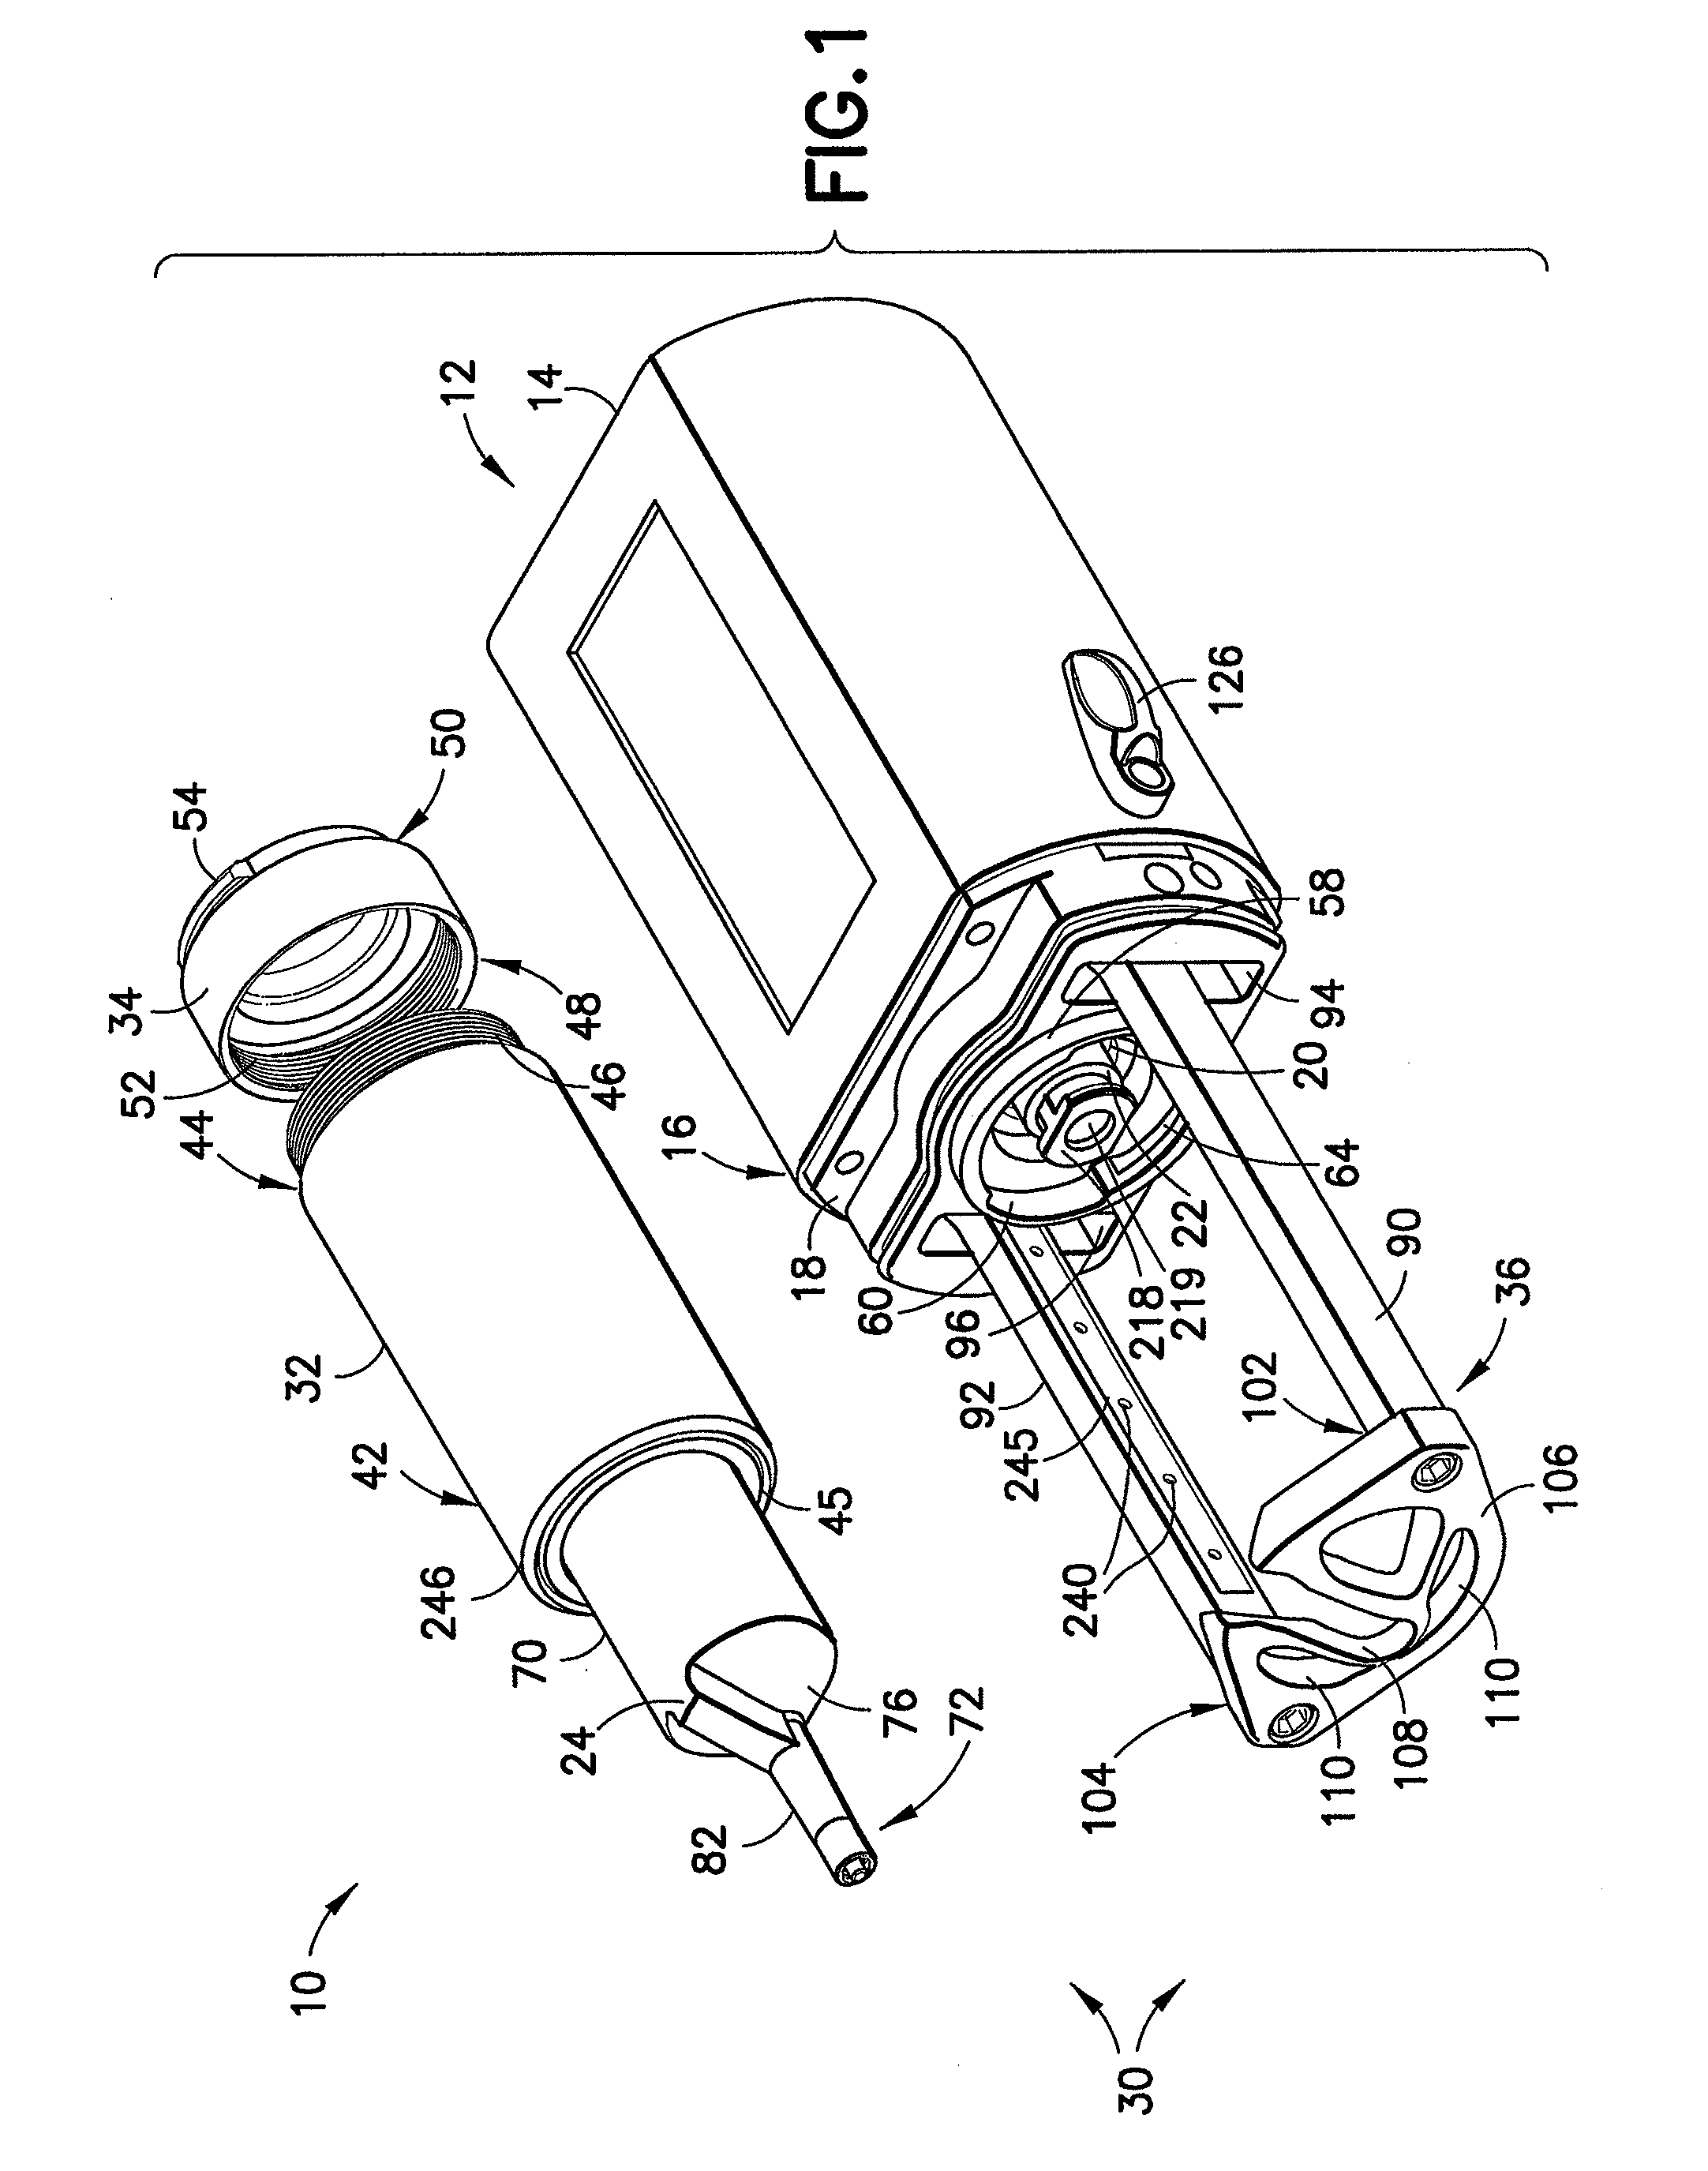 Fluid injection apparatus having Anti-rotation elements to limit syringe plunger rotation